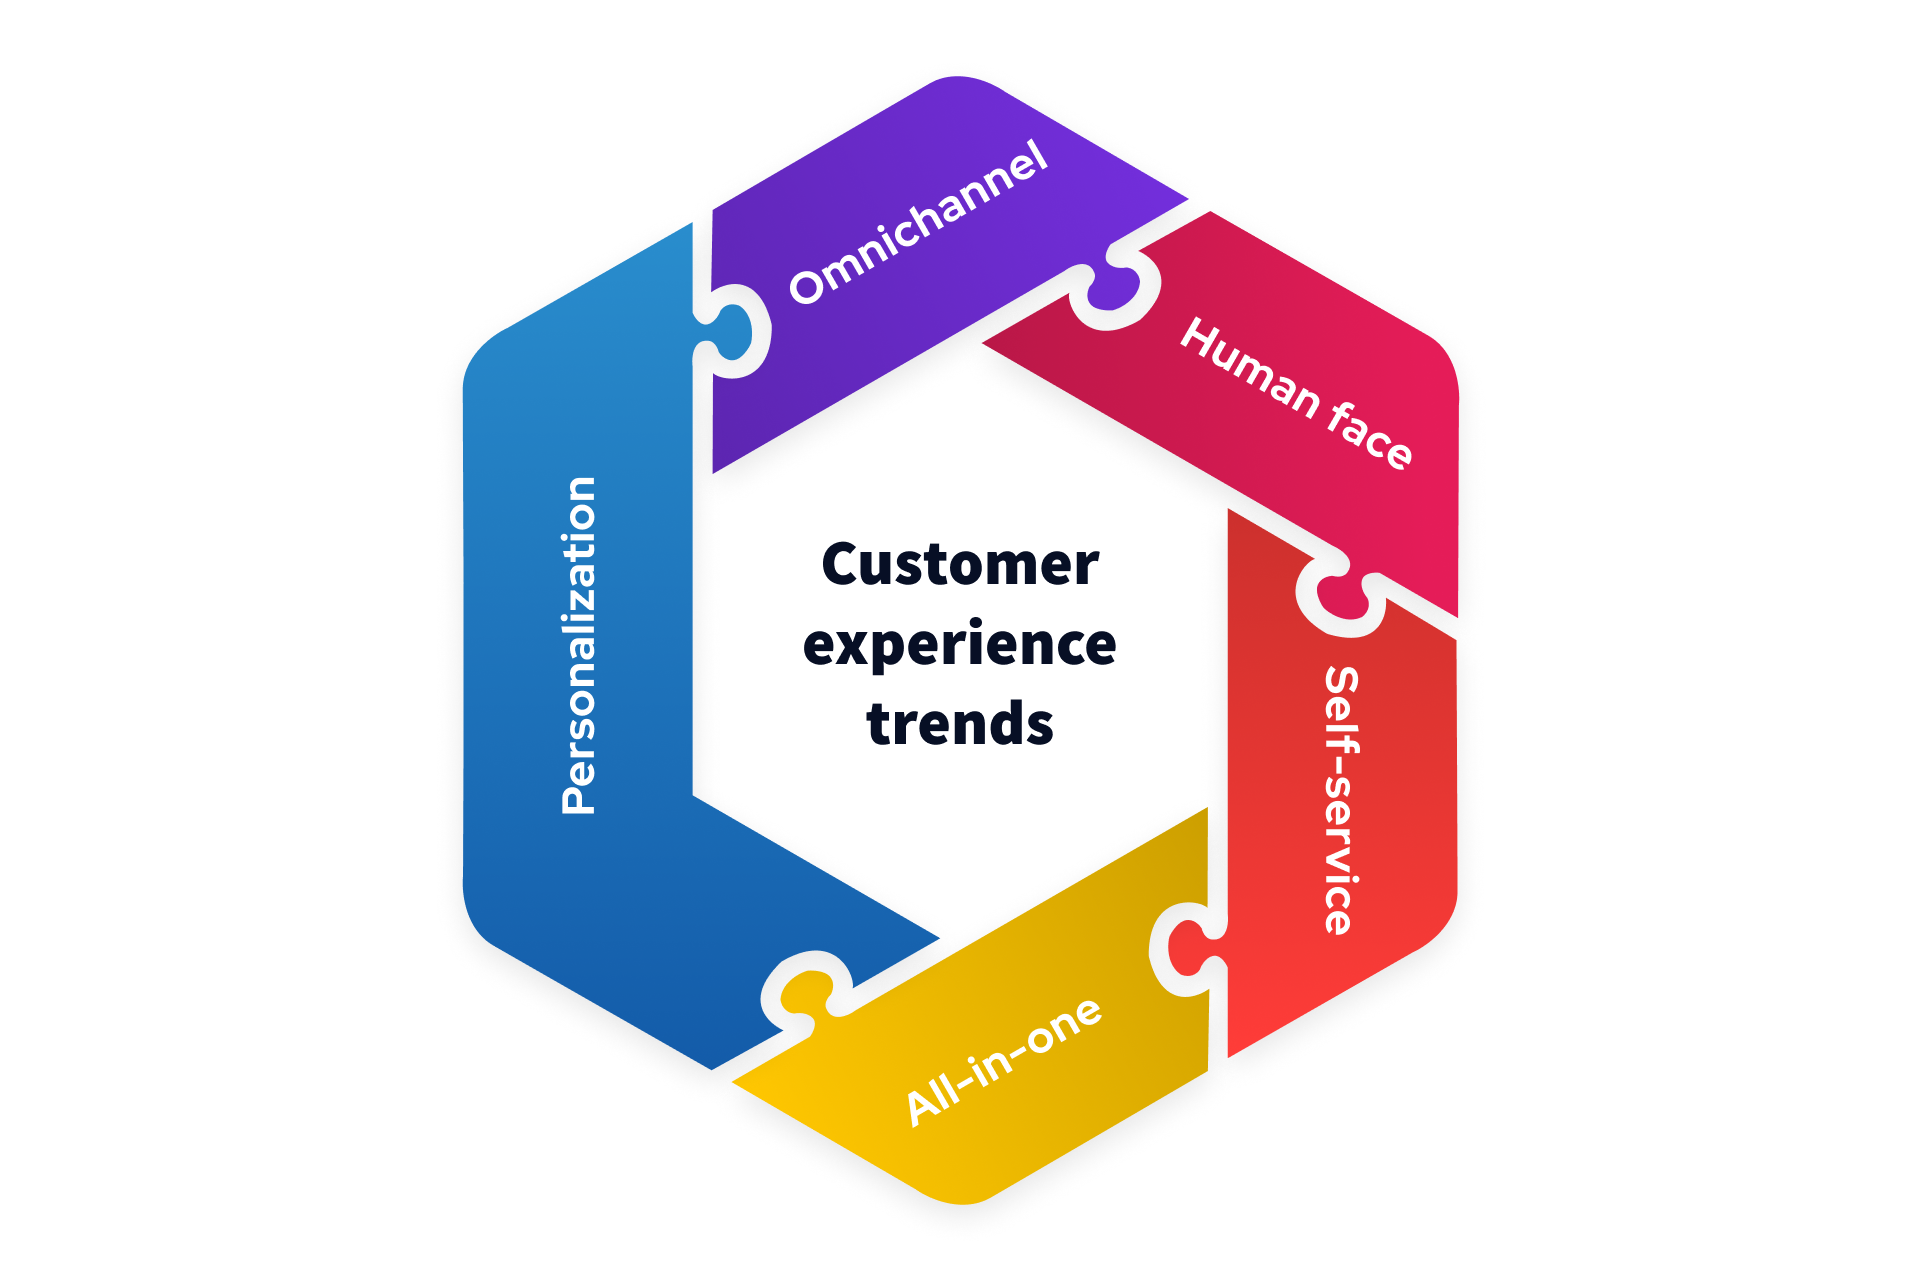 Customer experience trends